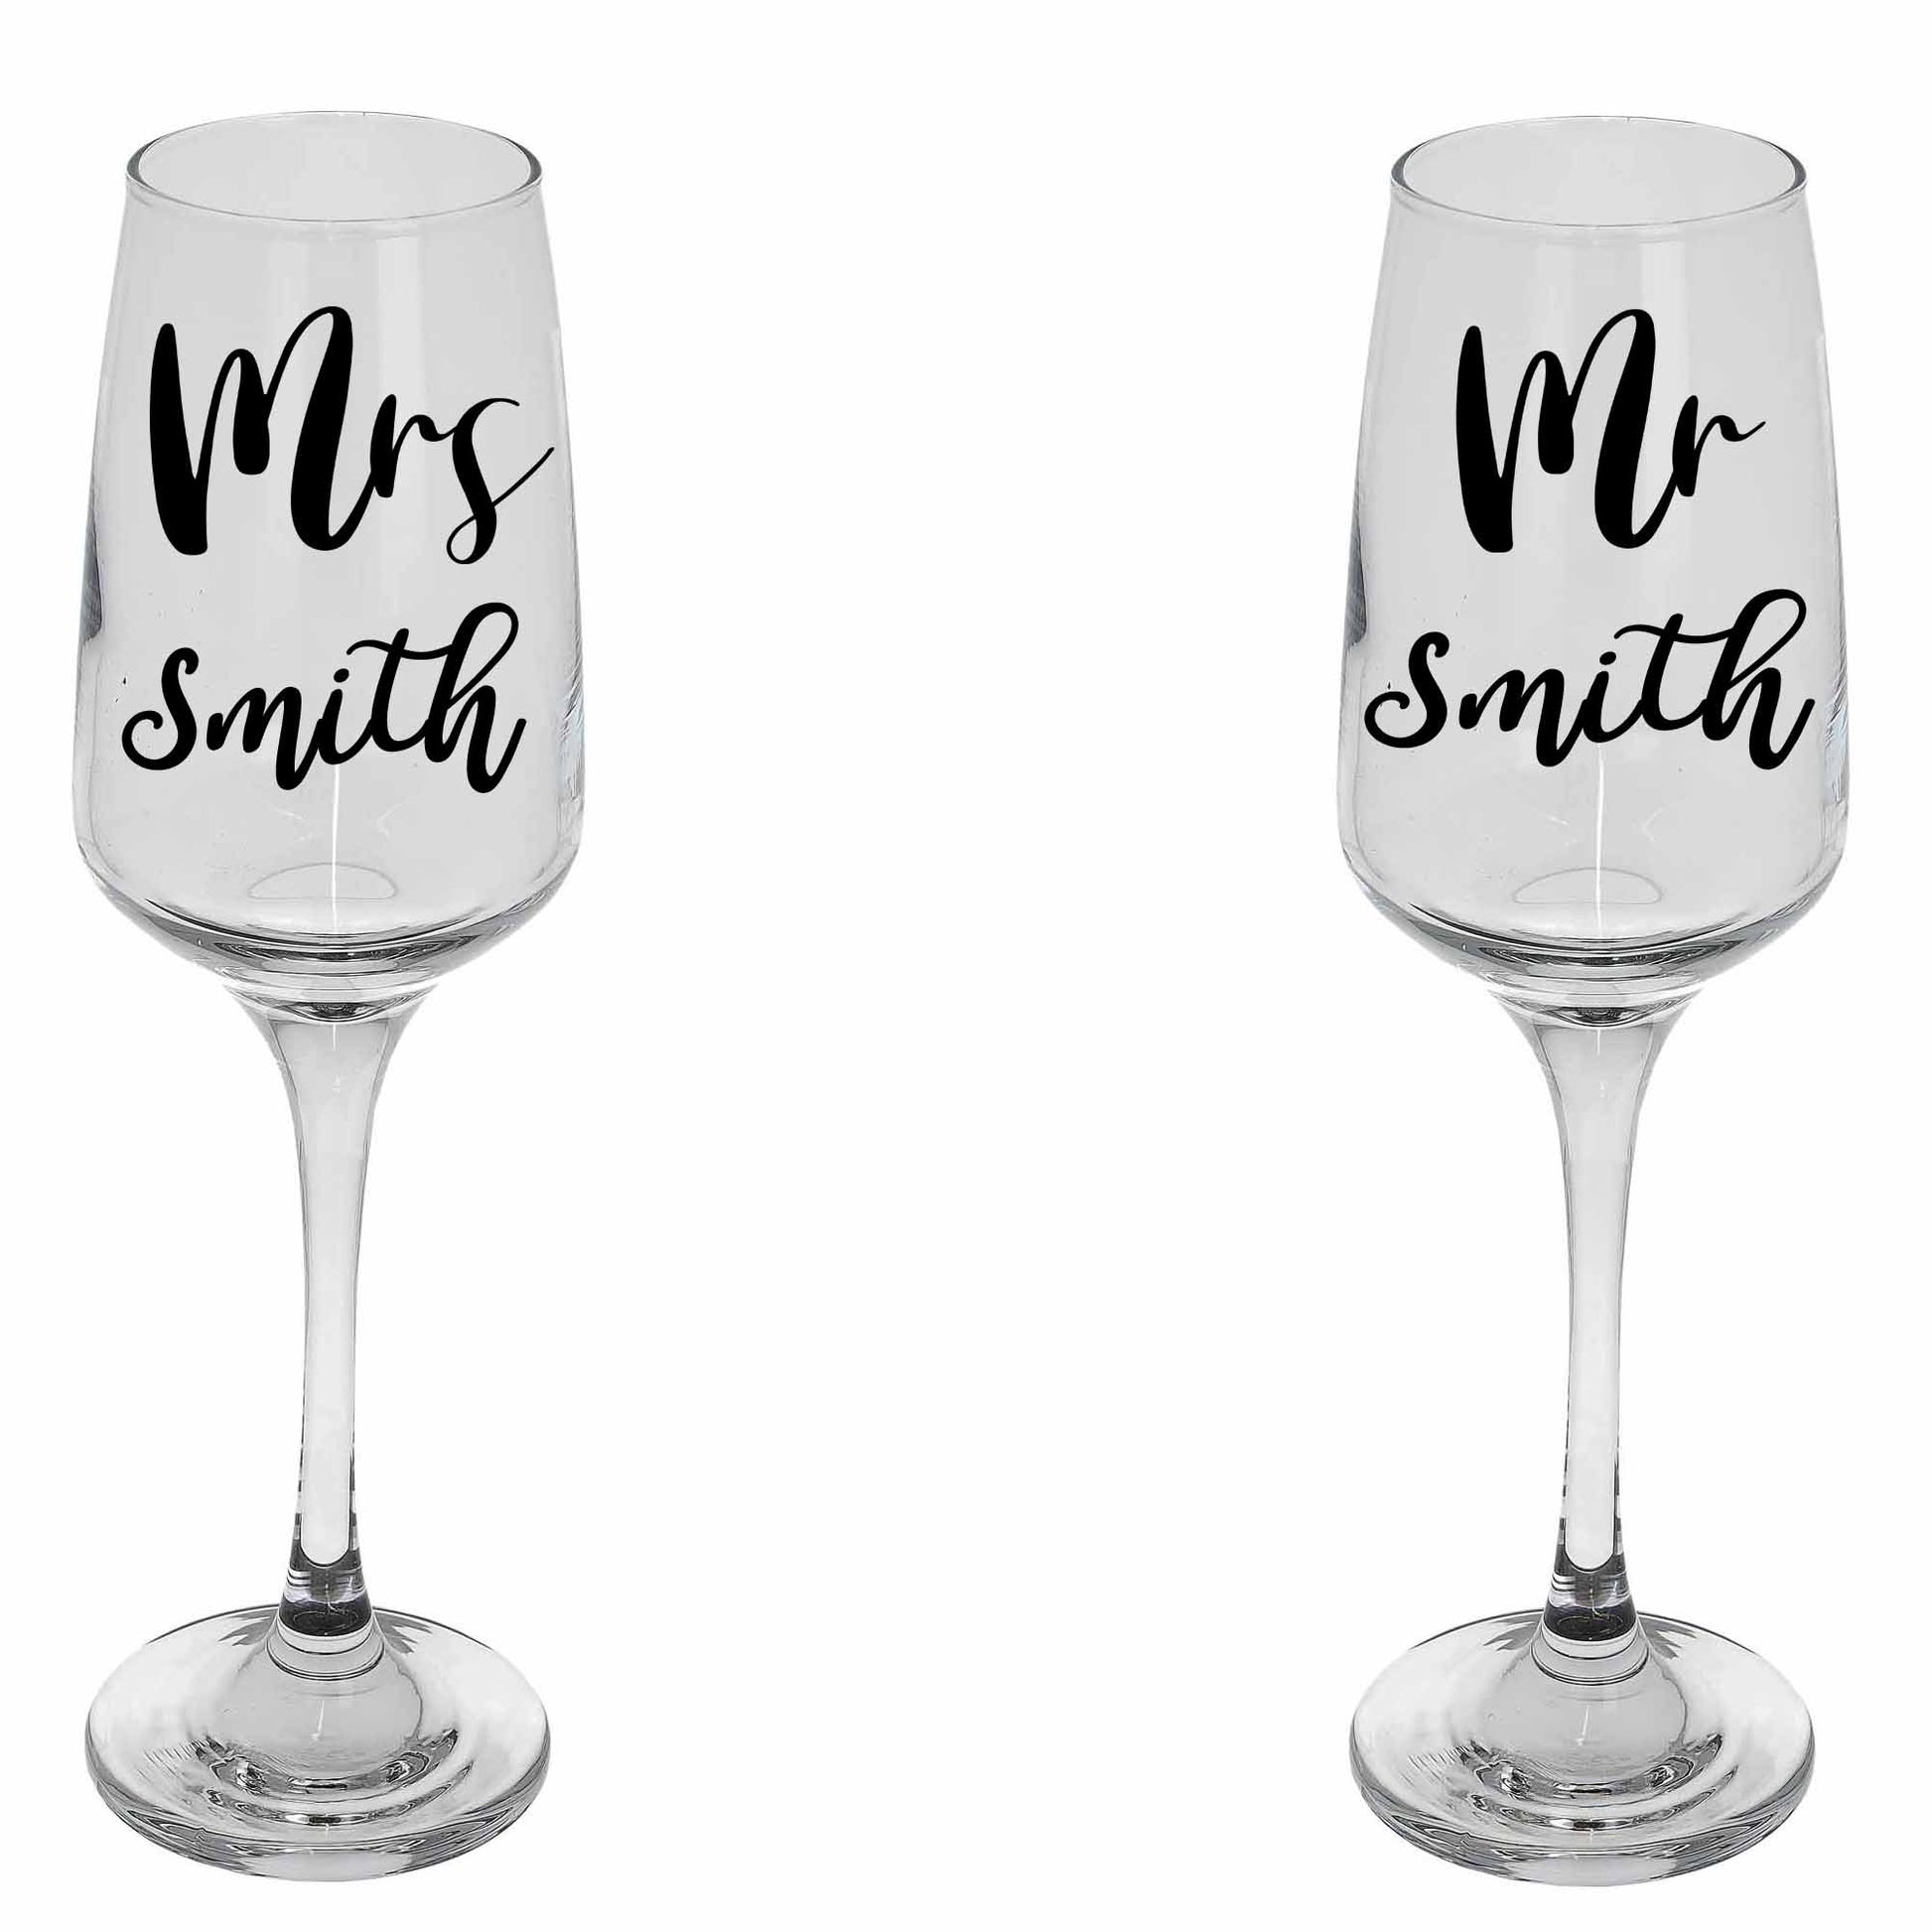 Personalised Mr & Mrs/ Mr & Mr / Mrs & Mrs Ice Bucket With matching Champagne Glasses  - Always Looking Good - Glasses Only  